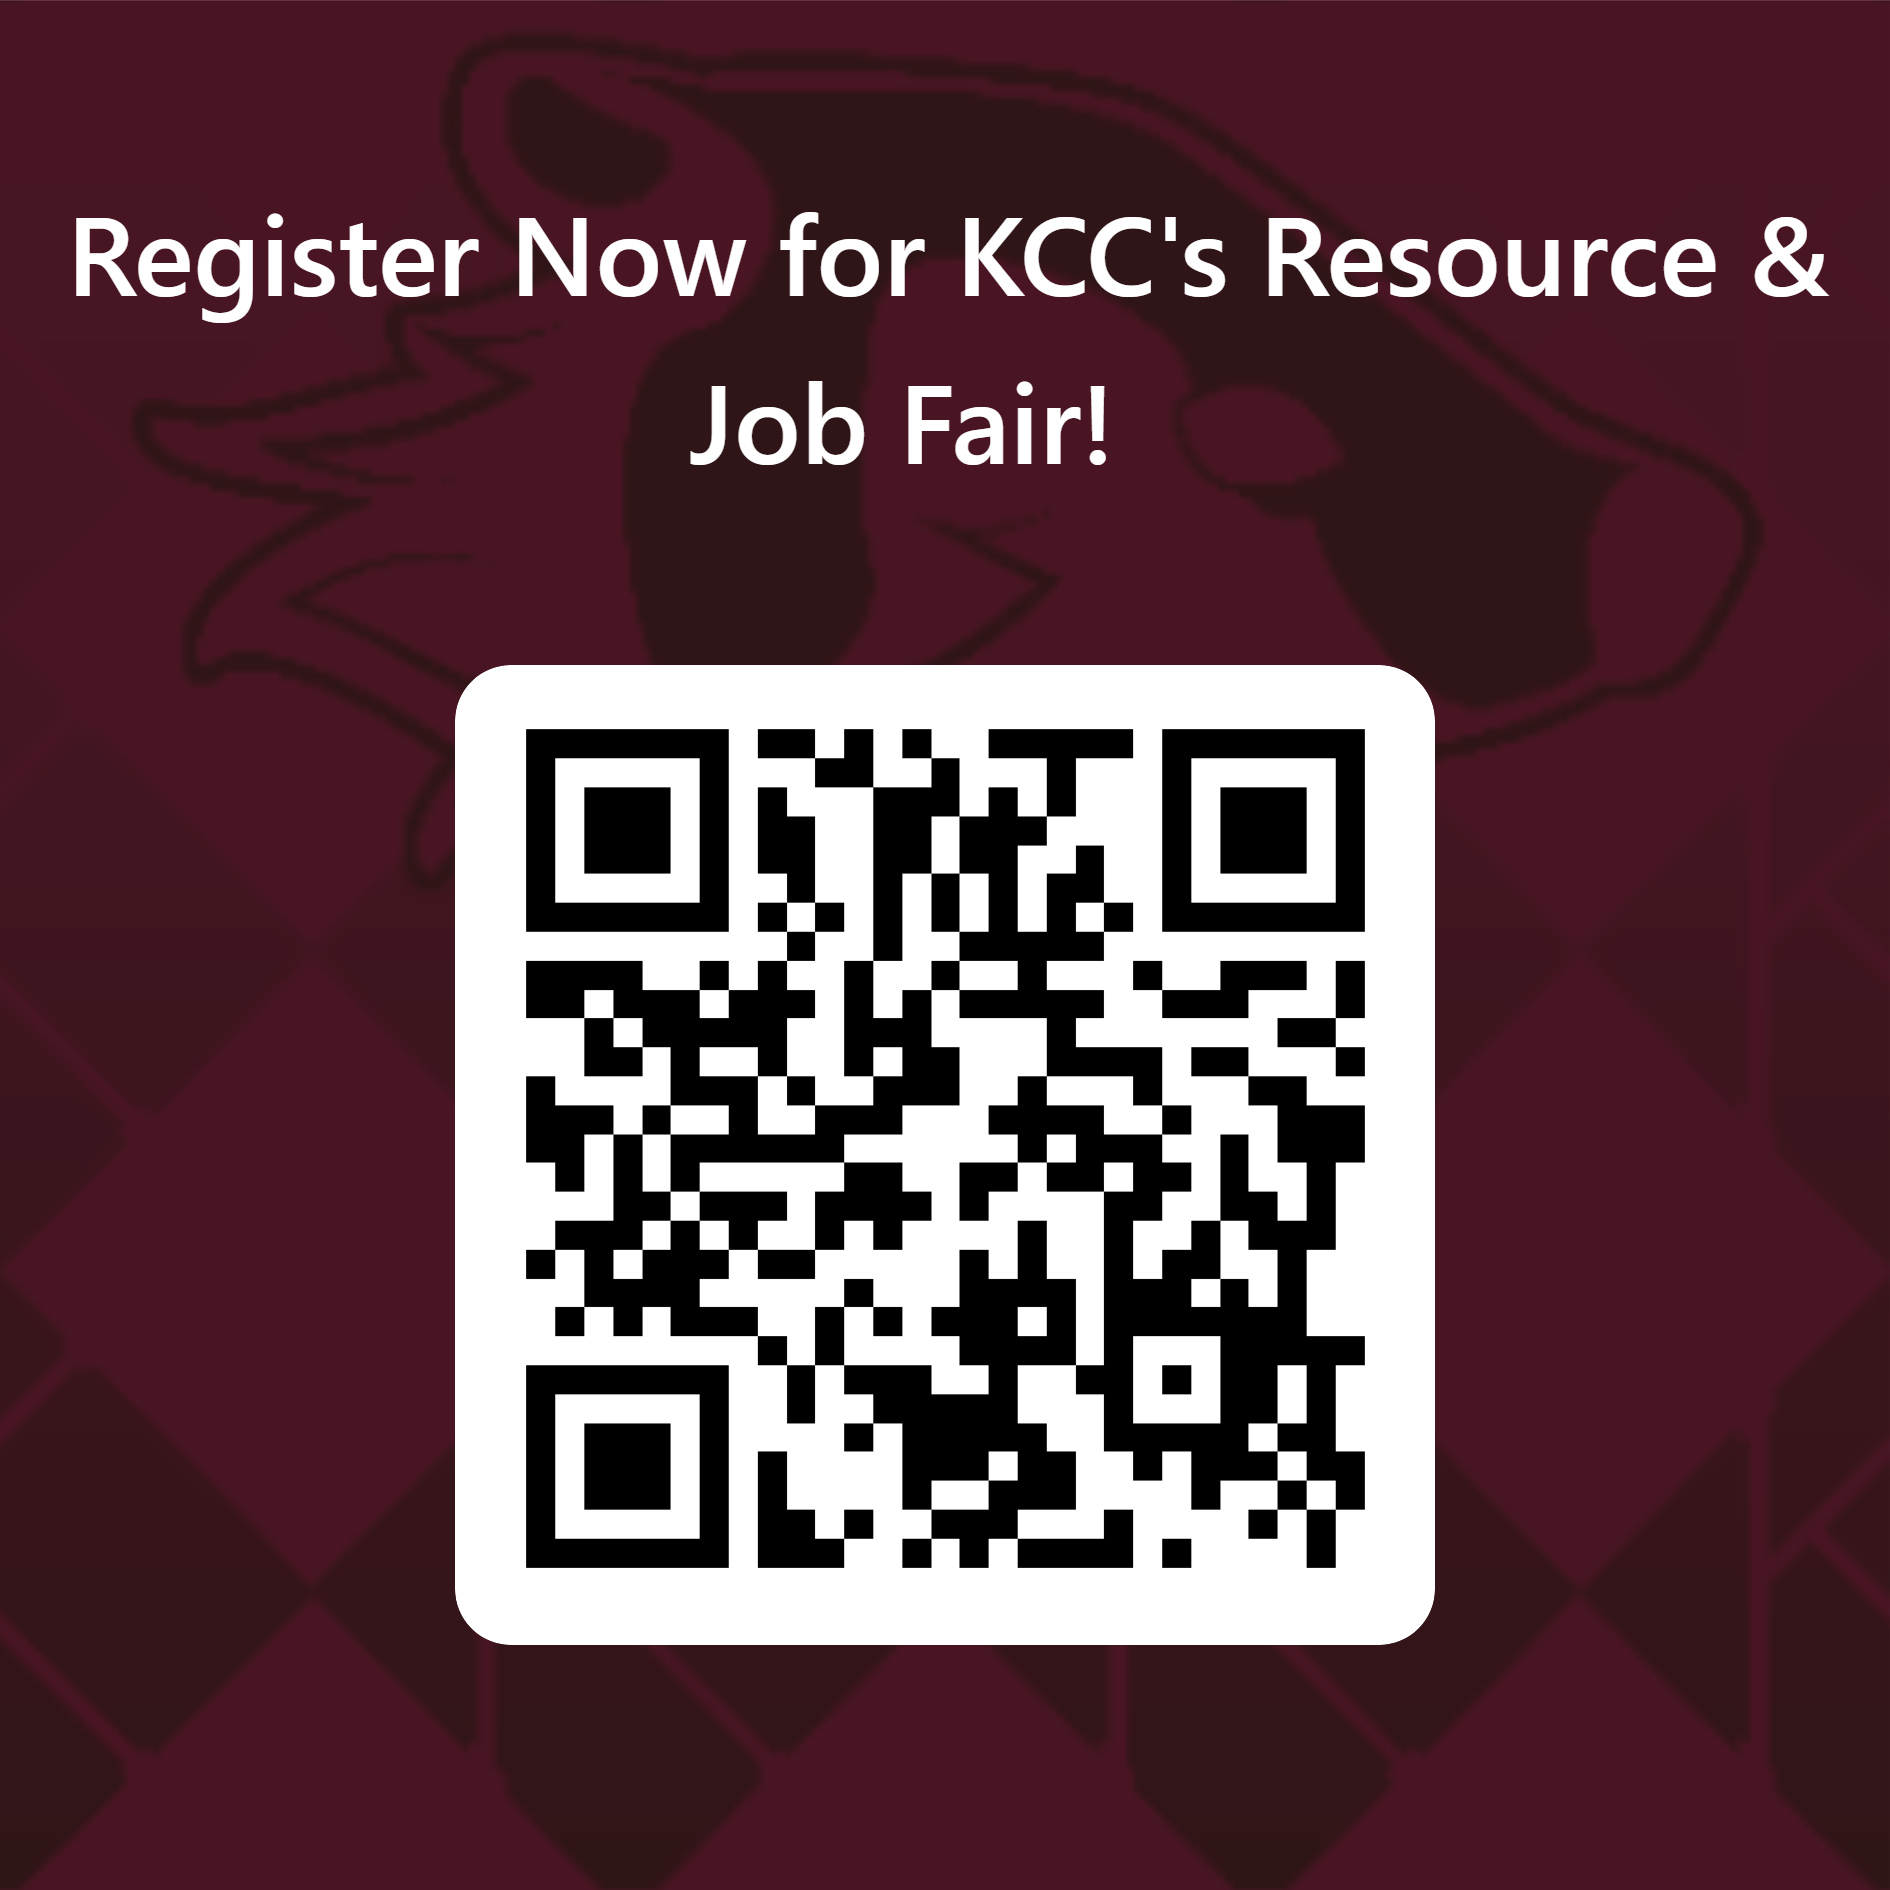 QRCode-for-Register-Now-for-KCCs-Resource-Job-Fair-.png